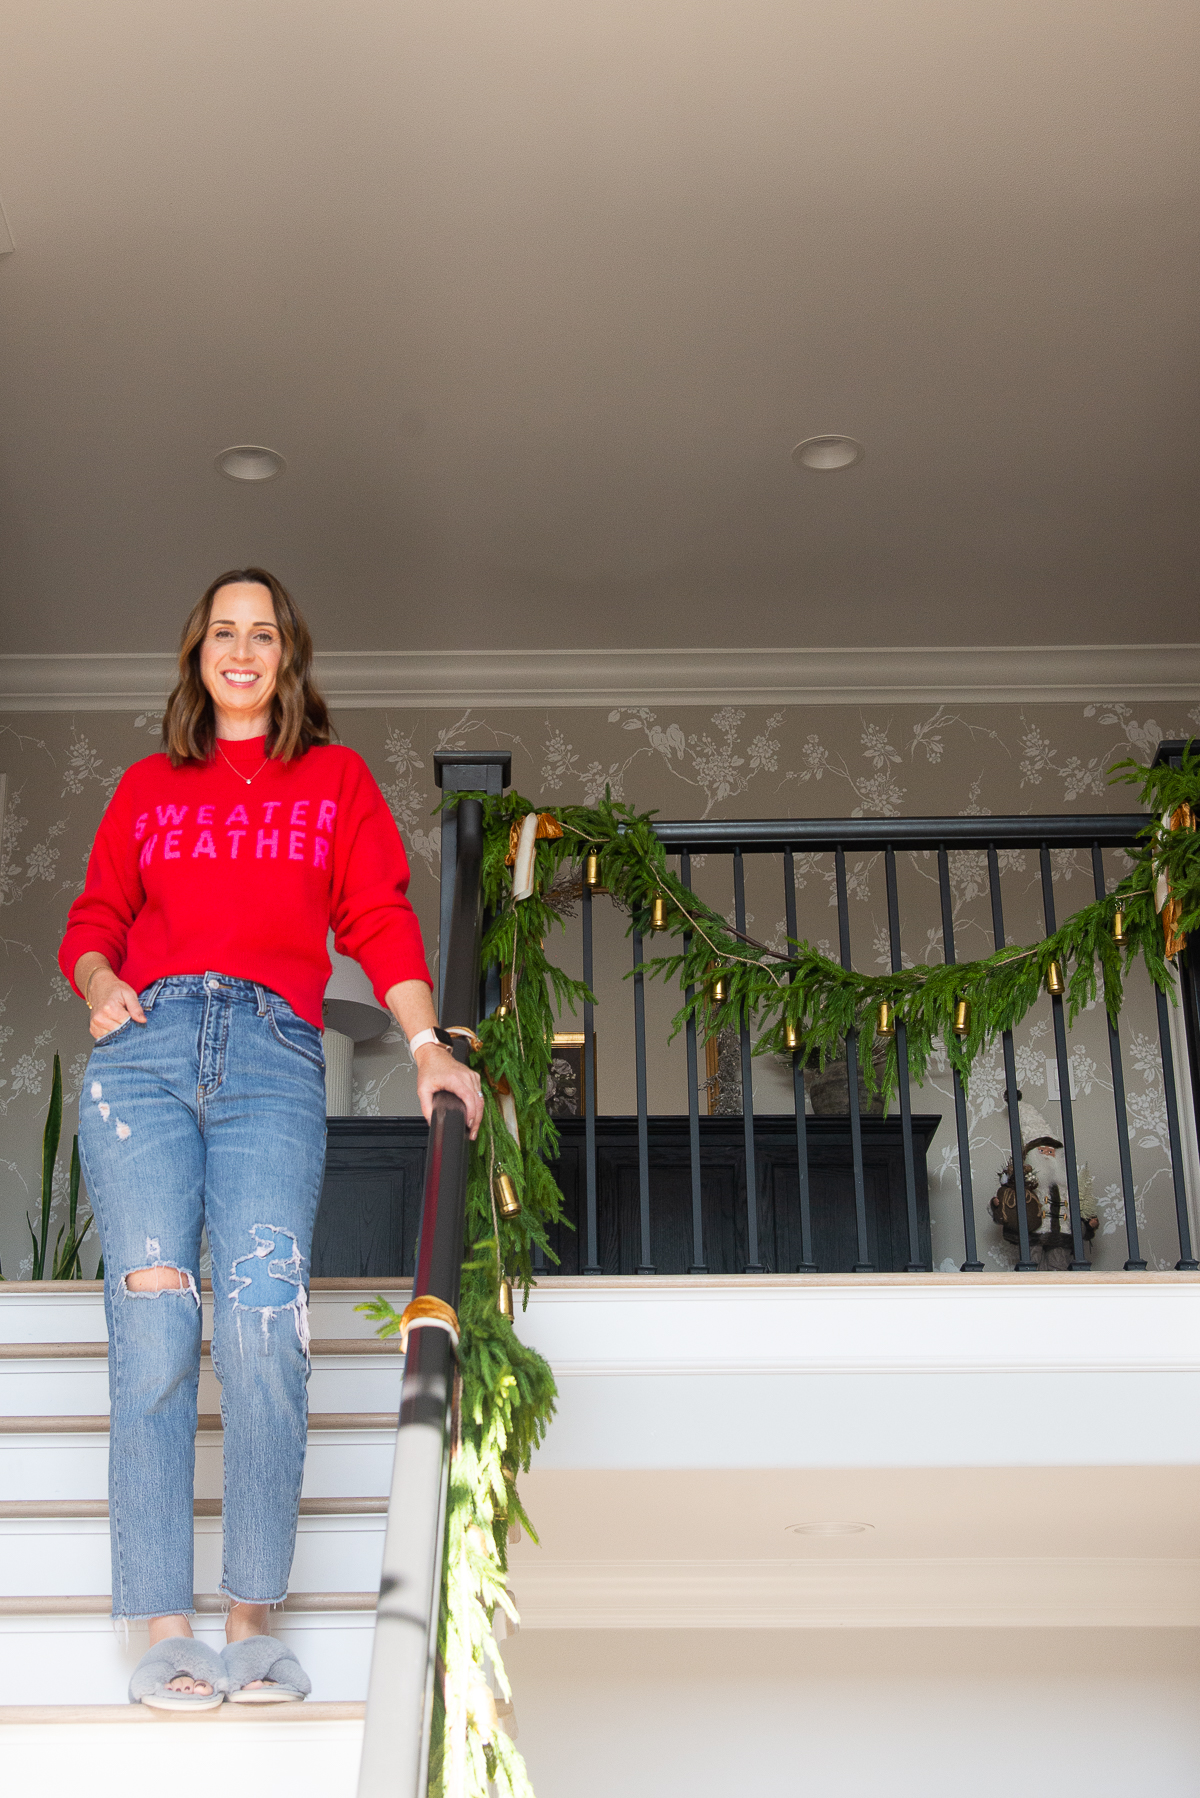 women wearing a red sweater and jeans standing on a staircase